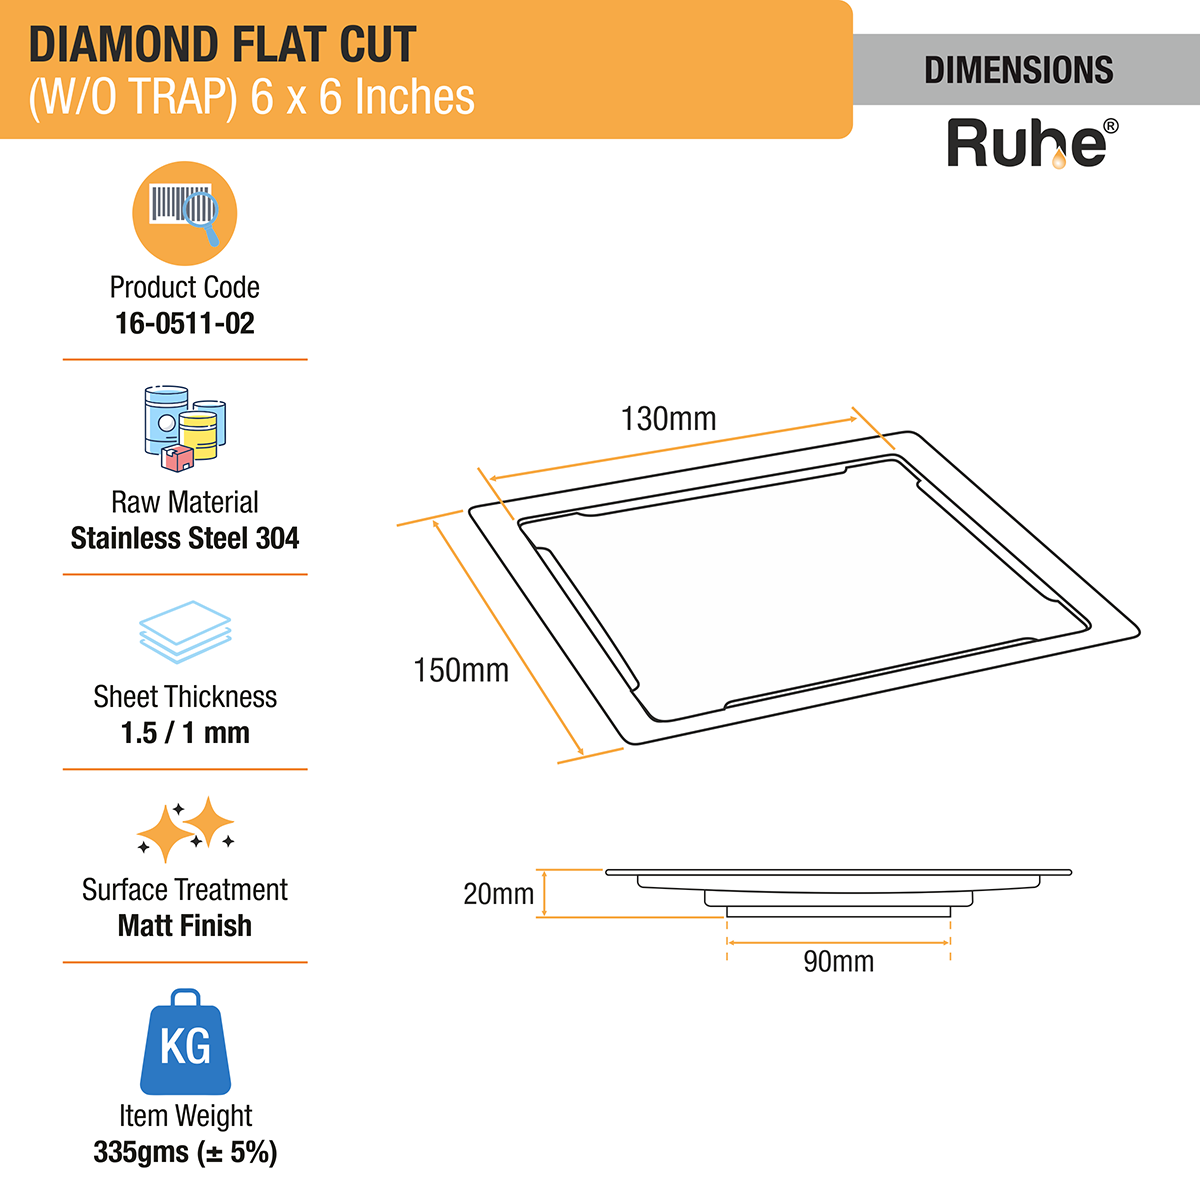 Diamond Square Flat Cut 304-Grade Floor Drain (6 x 6 Inches) dimensions and sizes